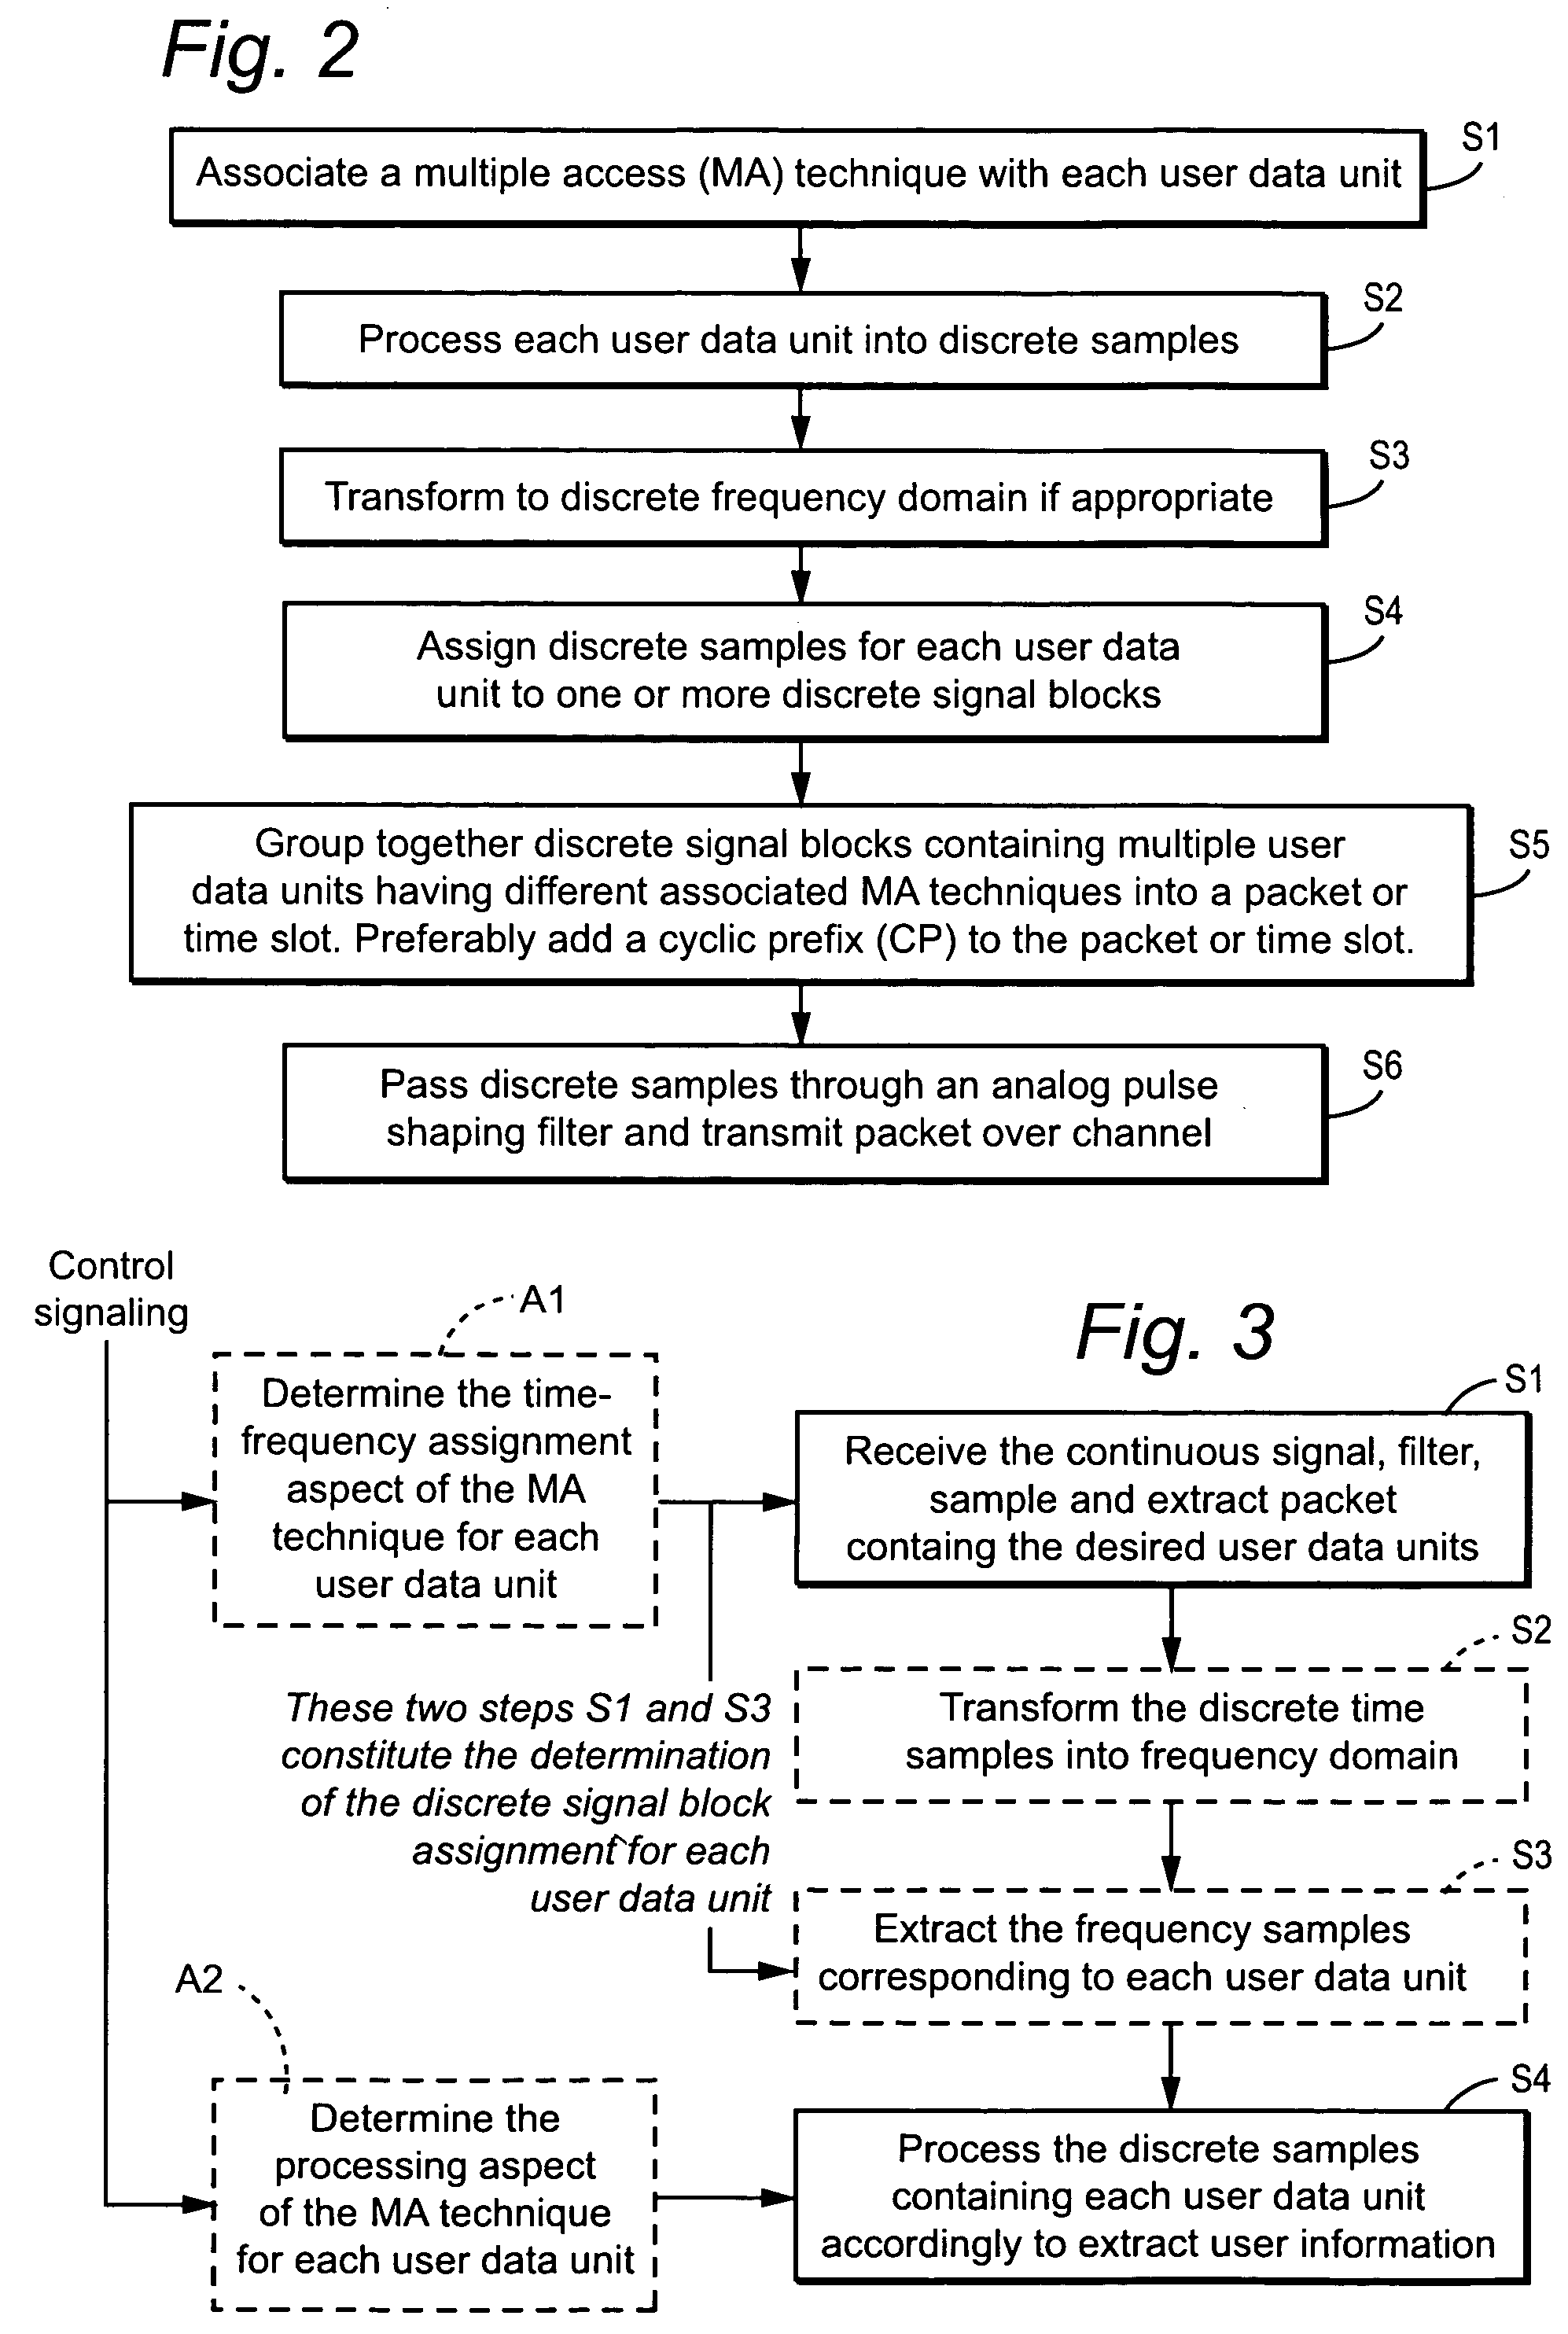 Method, apparatus, and communications interface for sending and receiving data blocks associated with different multiple access techniques